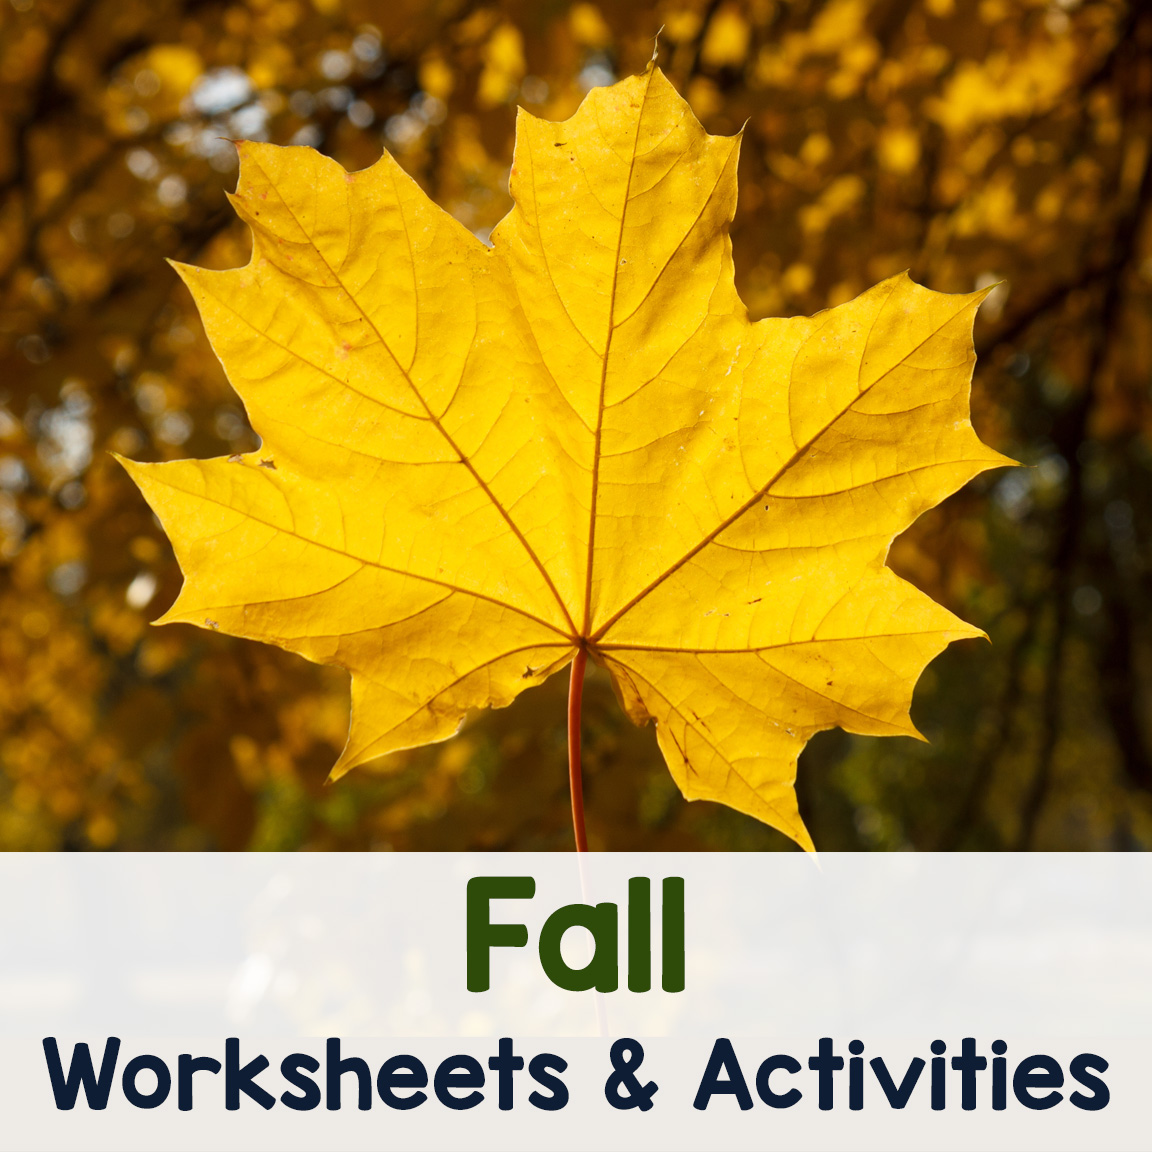 Fall Worksheets and Activities